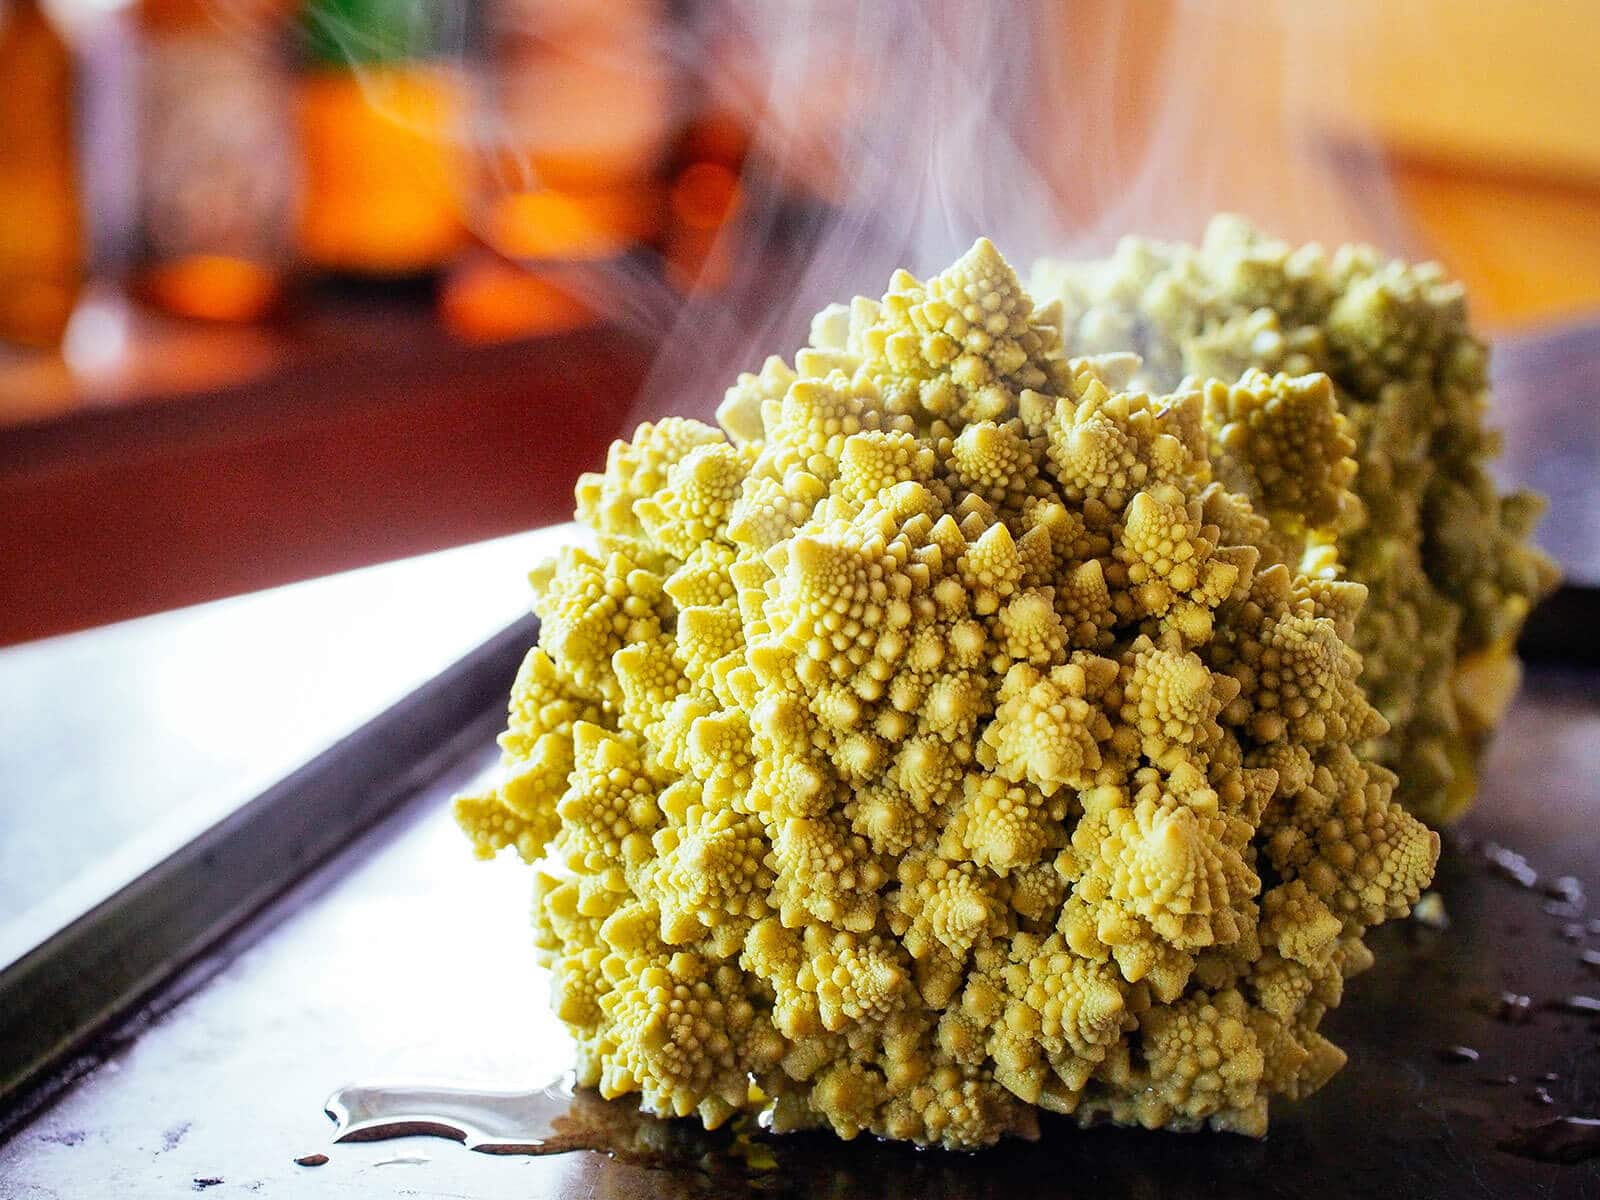 A steaming head of Romanesco broccoli out of the oven